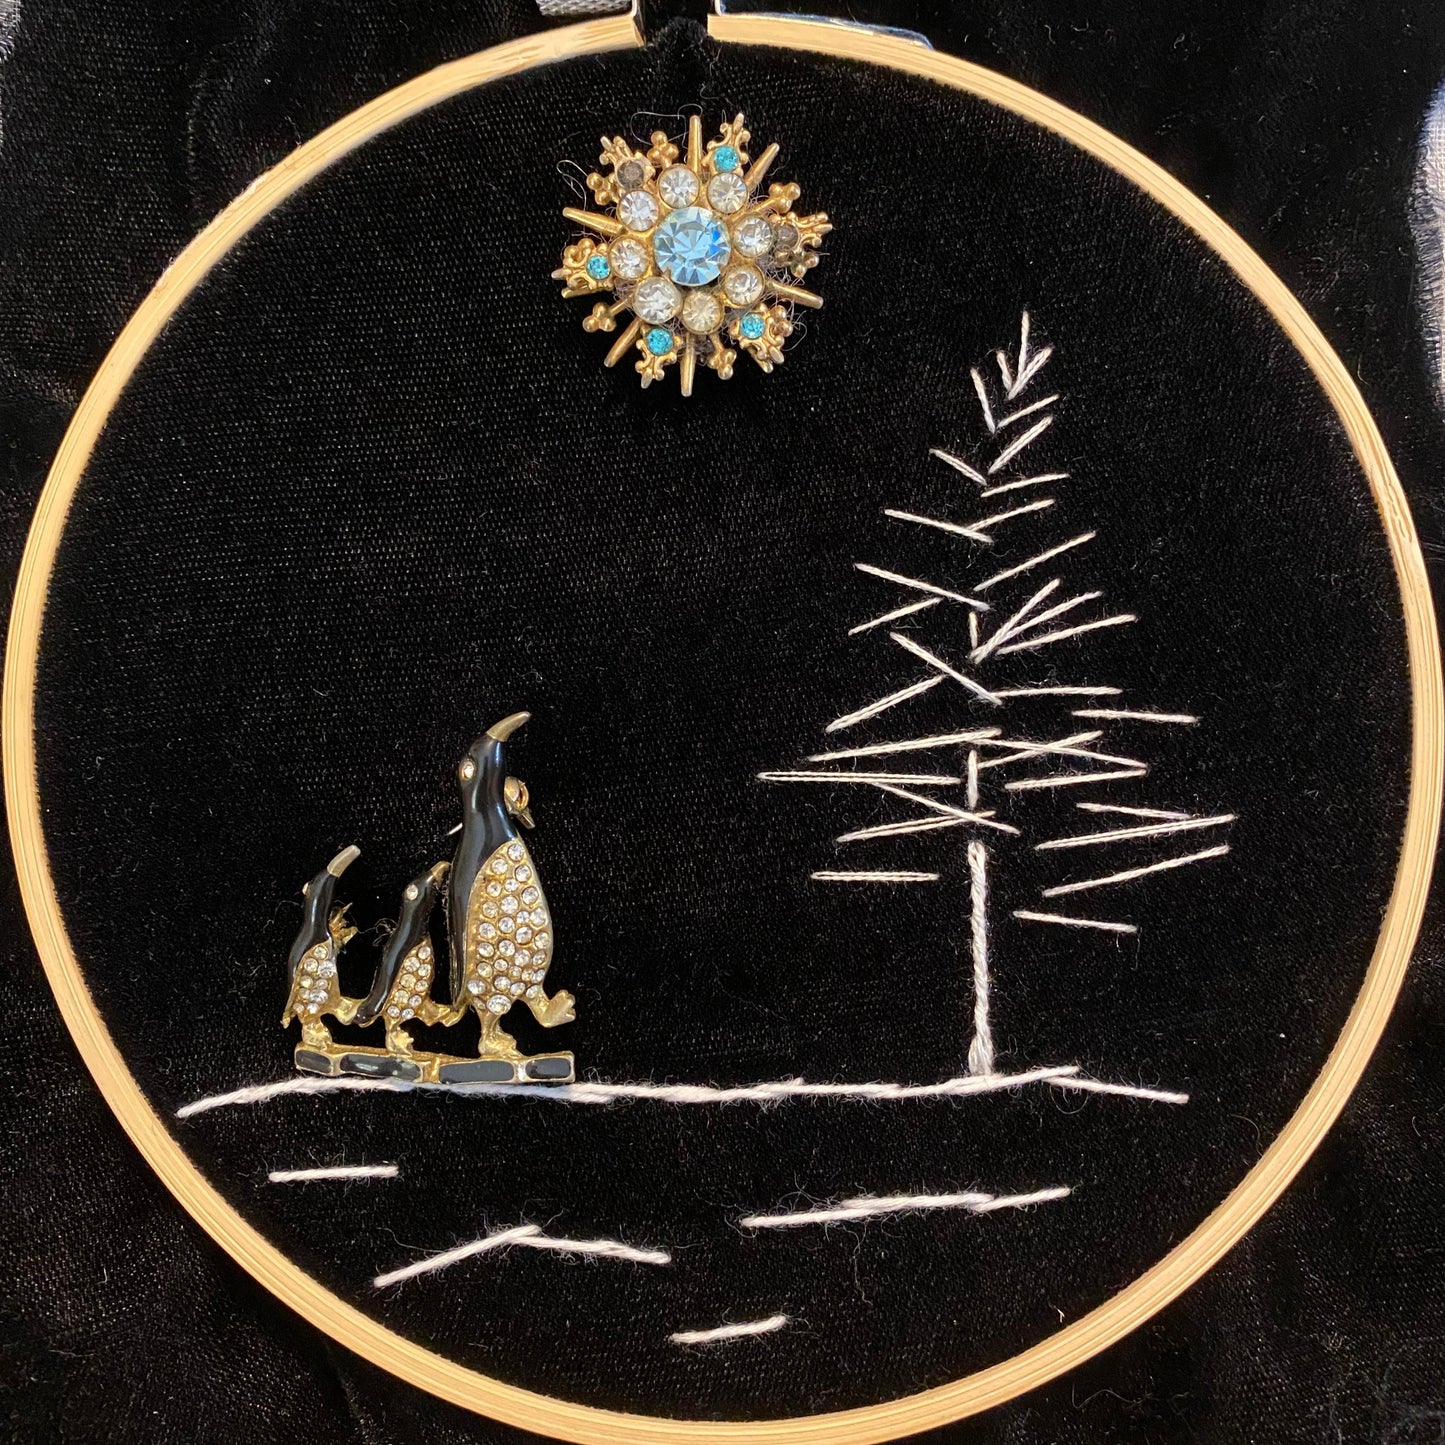 Treasure Stitching: transforming trinkets into embroidery art